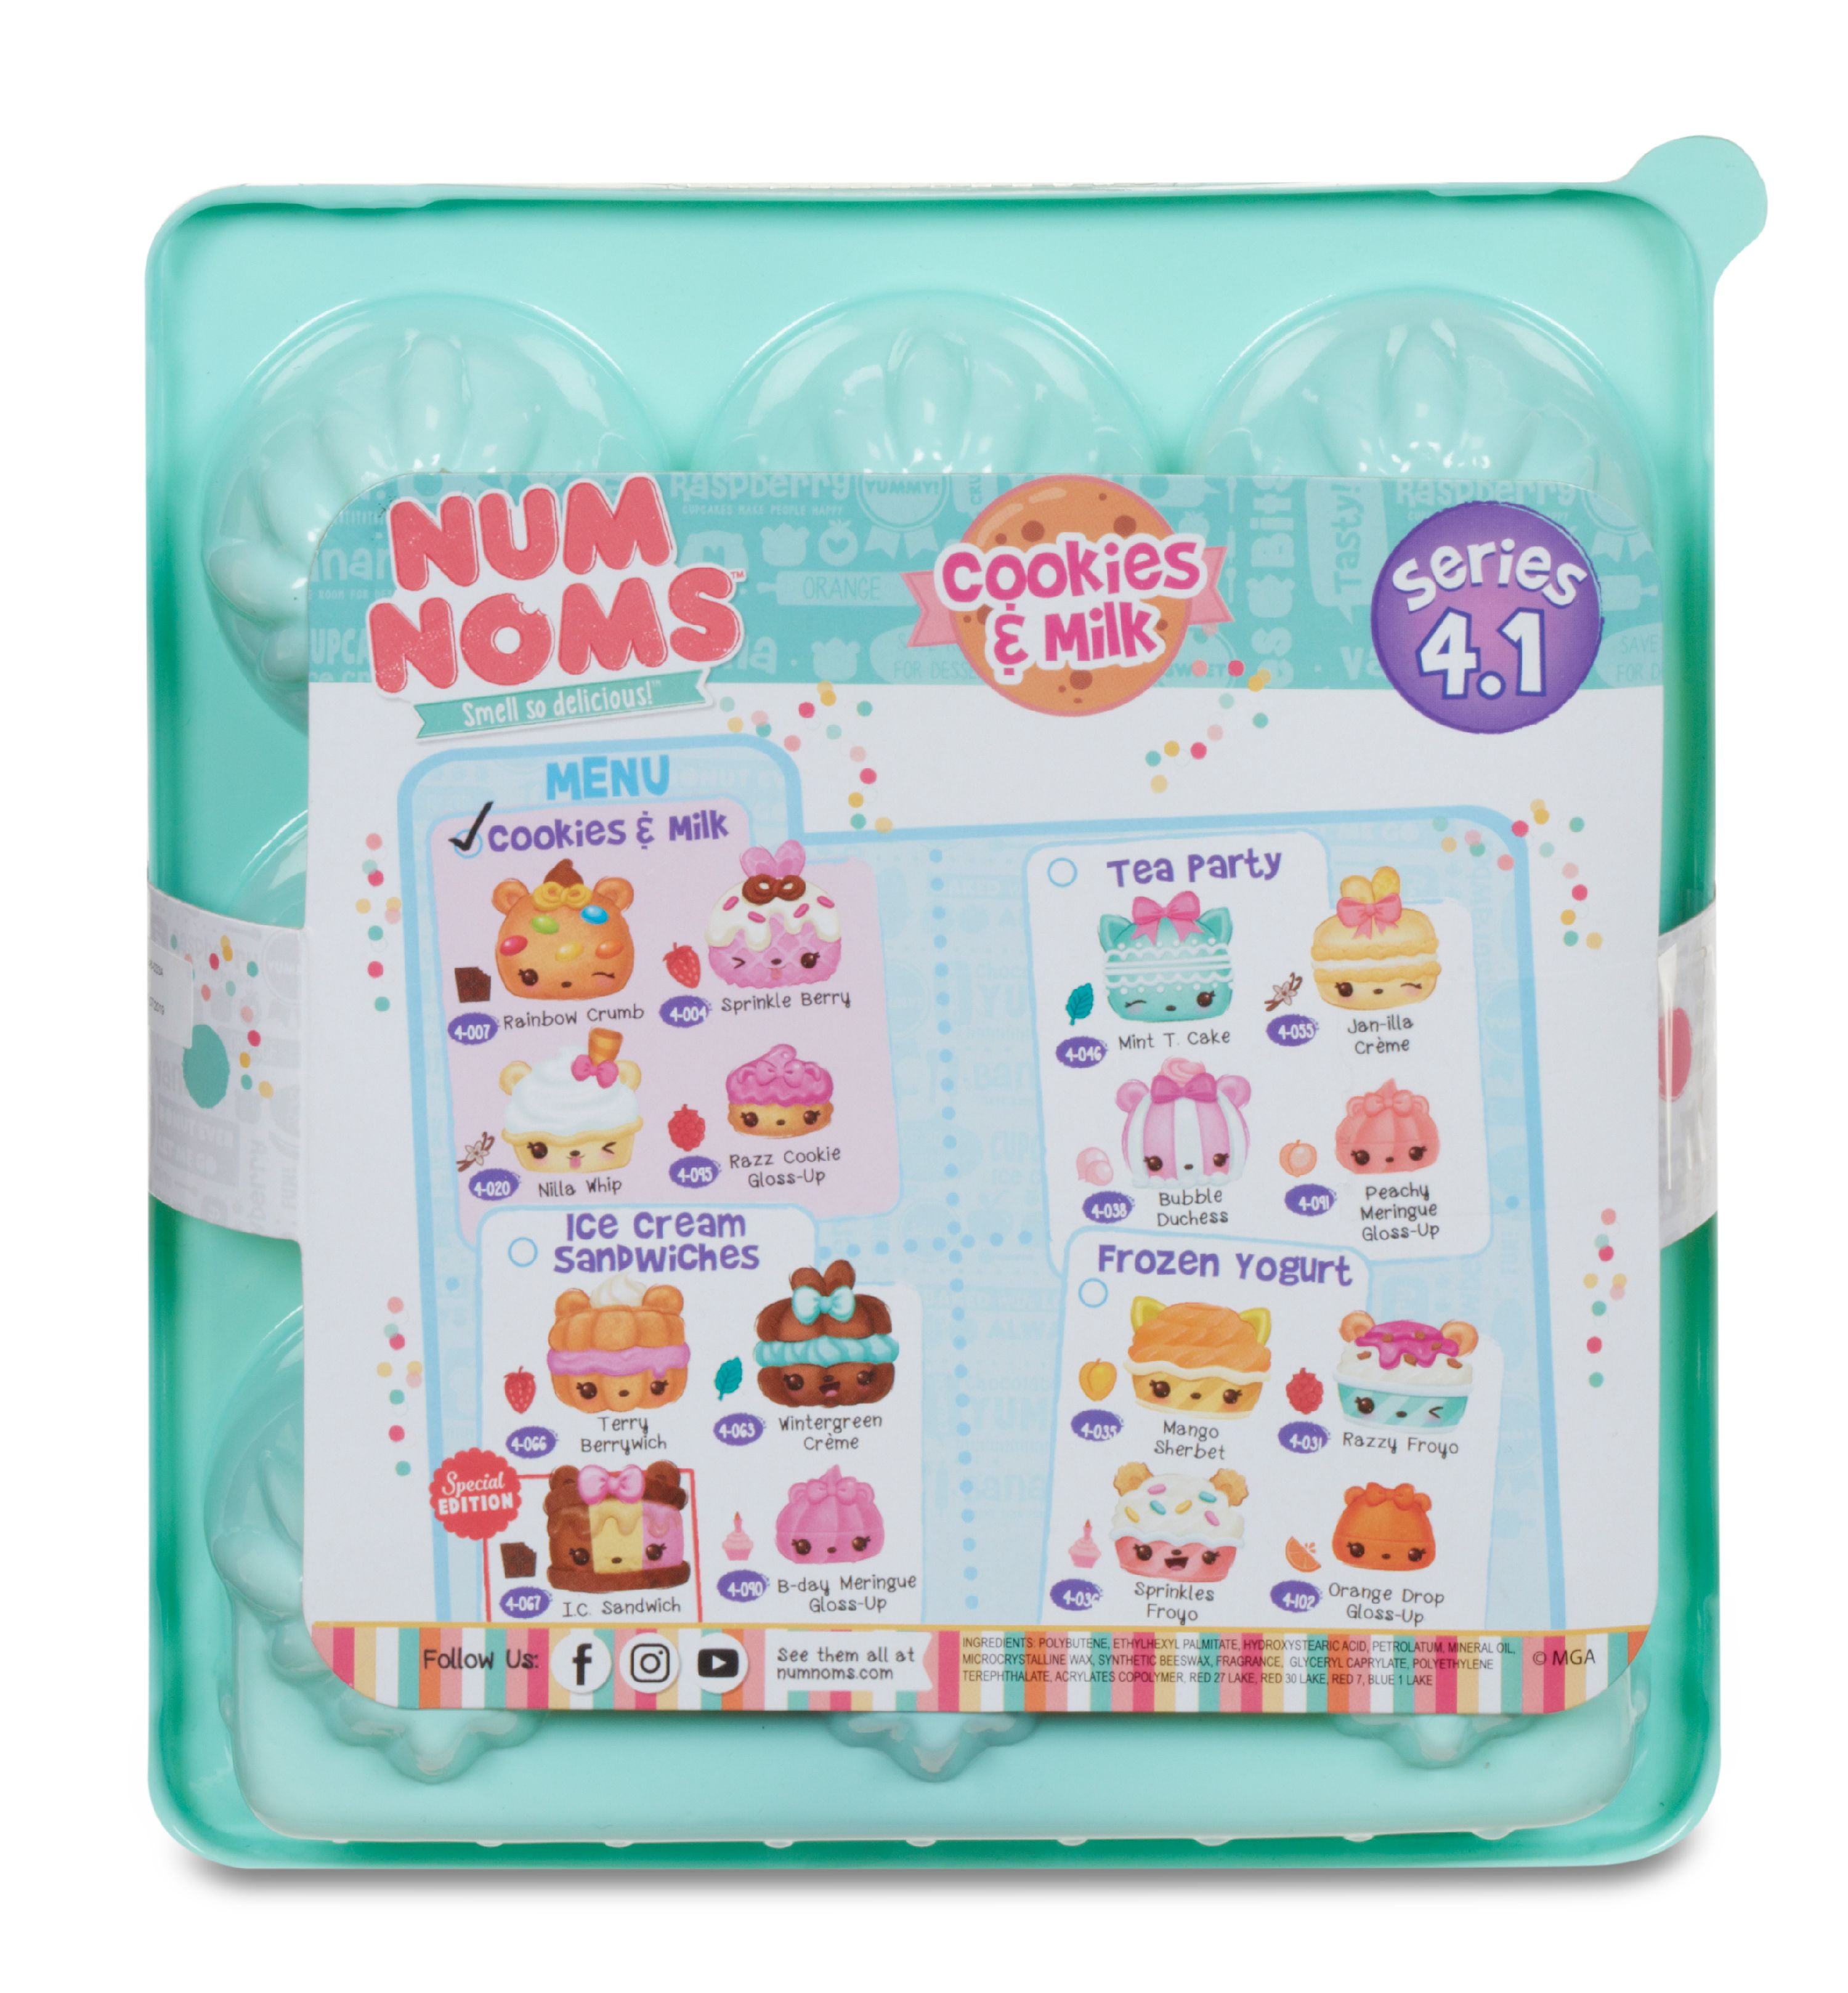 Num Noms Series 3.1 Rainbow Candies Starter 4-Pack MGA